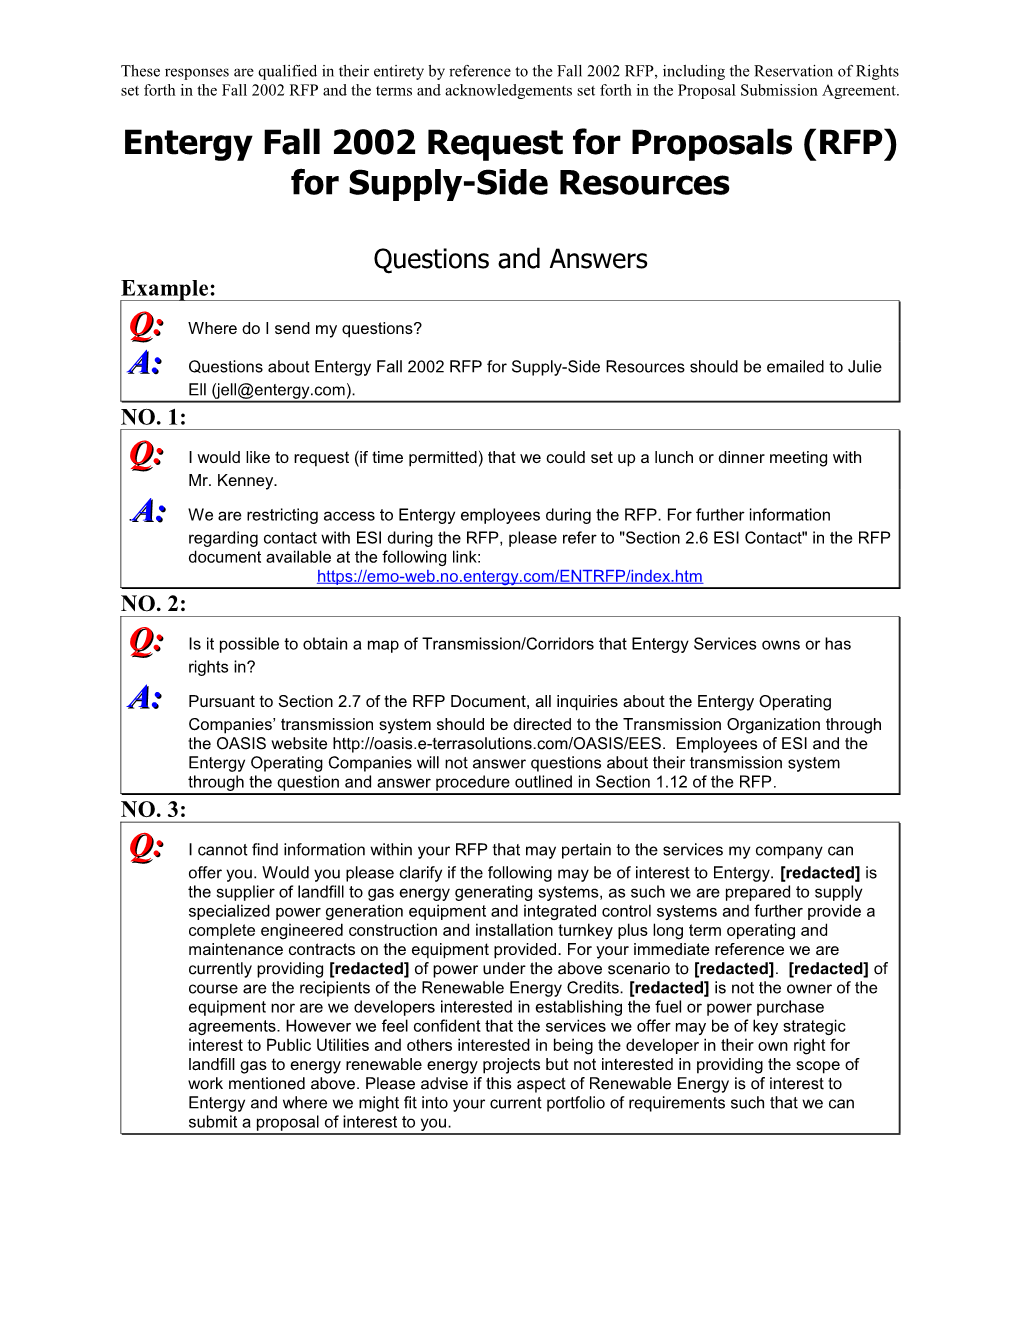 Entergy Fall 2002 Request for Proposals (RFP) for Supply-Side Resources